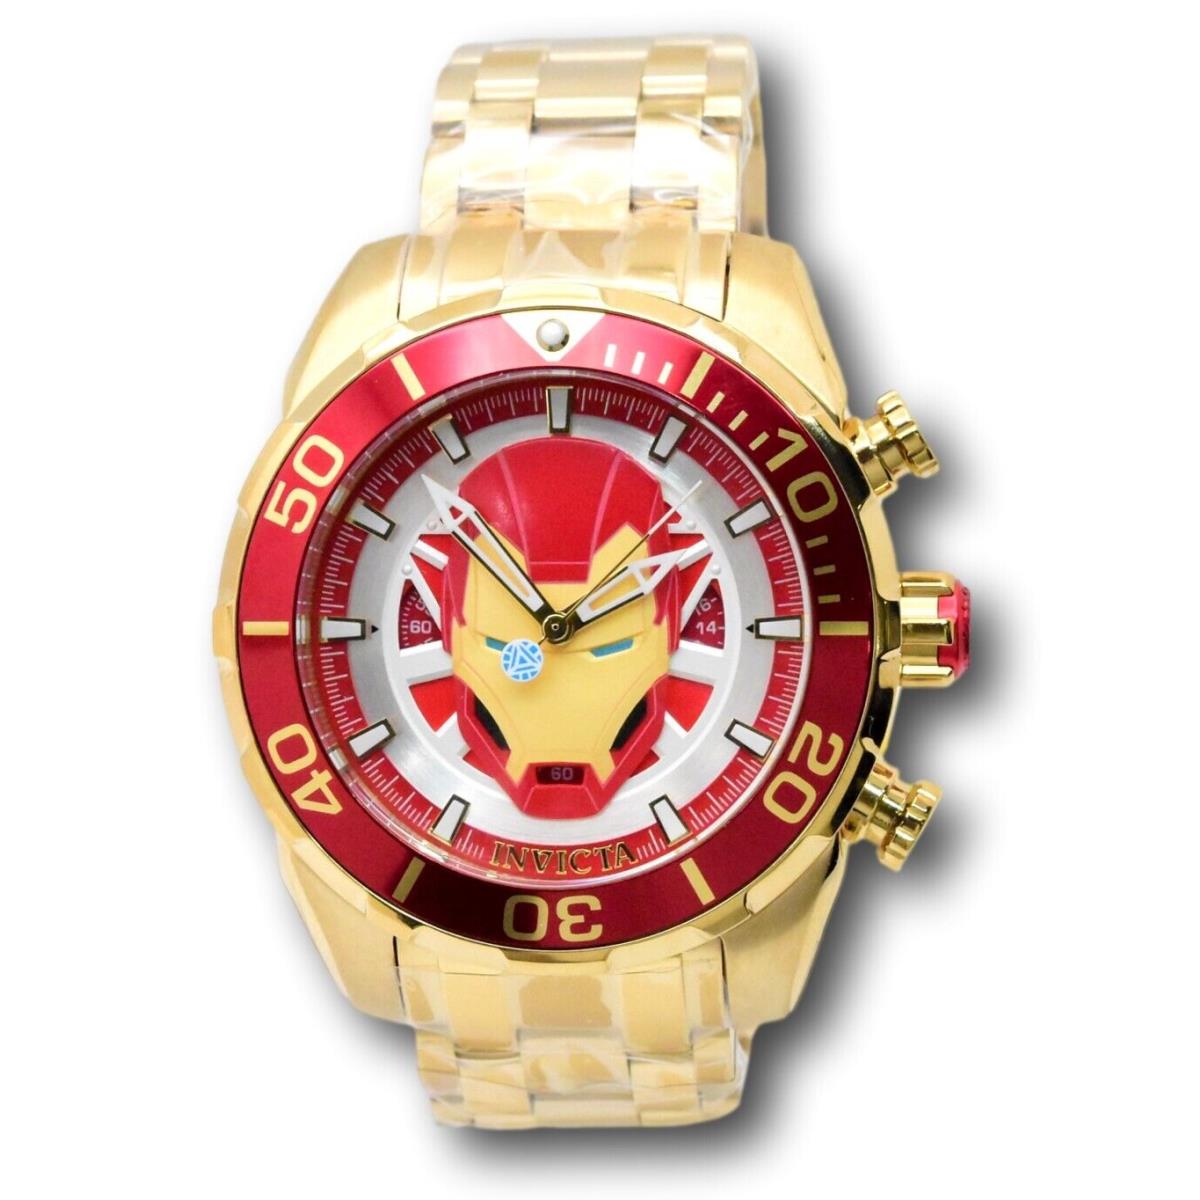 Invicta Marvel Marvel Tony Stark Ironman Men`s 50mm Limited Chrono Watch 43056 - Dial: Gold, Red, Silver, White, Yellow, Band: Gold, Yellow, Bezel: Gold, Red, Yellow